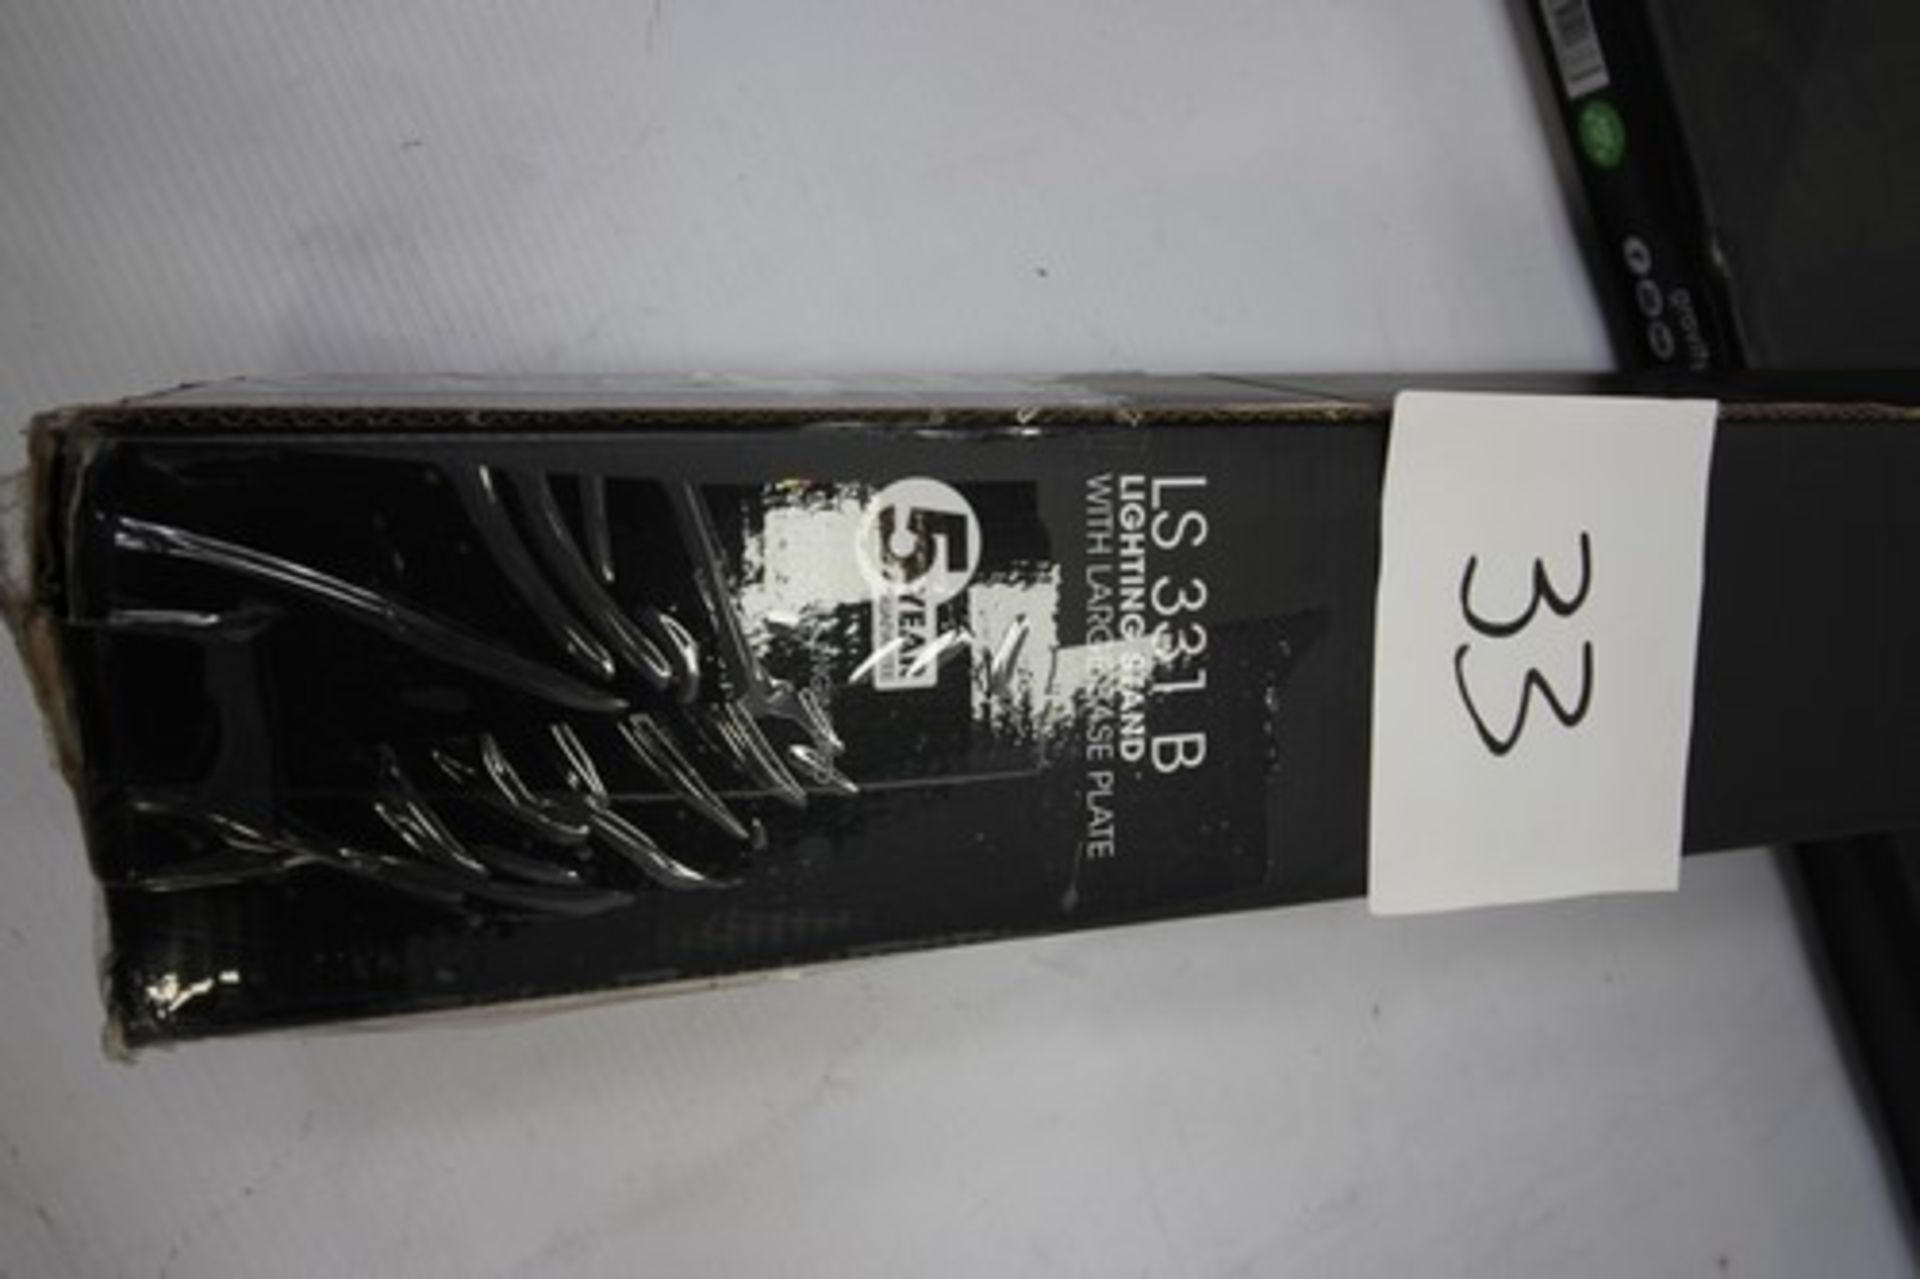 1 x Gravity large lighting stand with base, ref: LS331B - sealed new in box (ES5) - Image 3 of 3